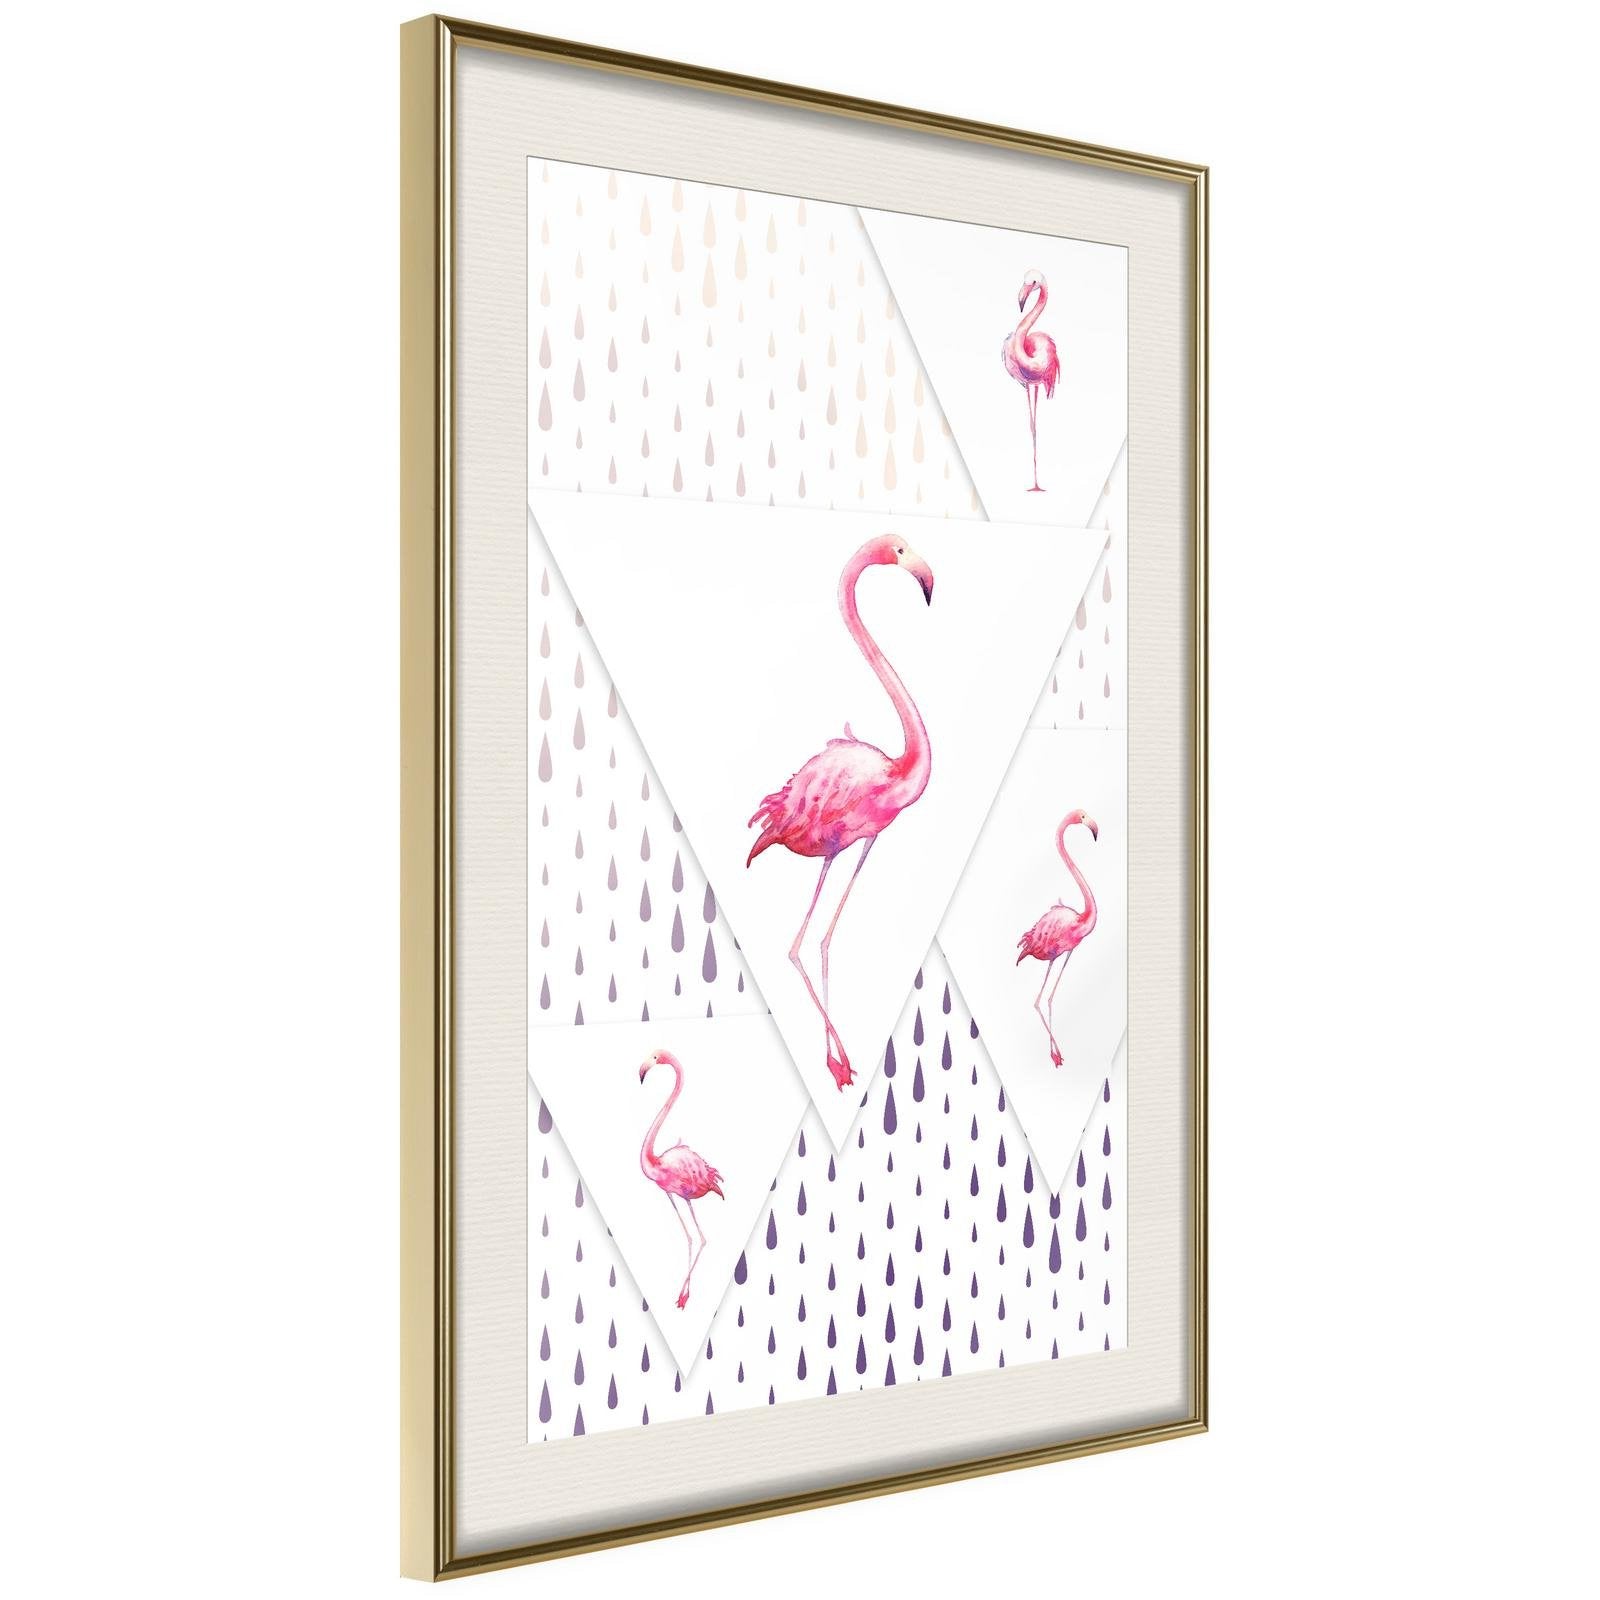 Inramad Poster / Tavla - Flamingos and Triangles-Poster Inramad-Artgeist-20x30-Guldram med passepartout-peaceofhome.se